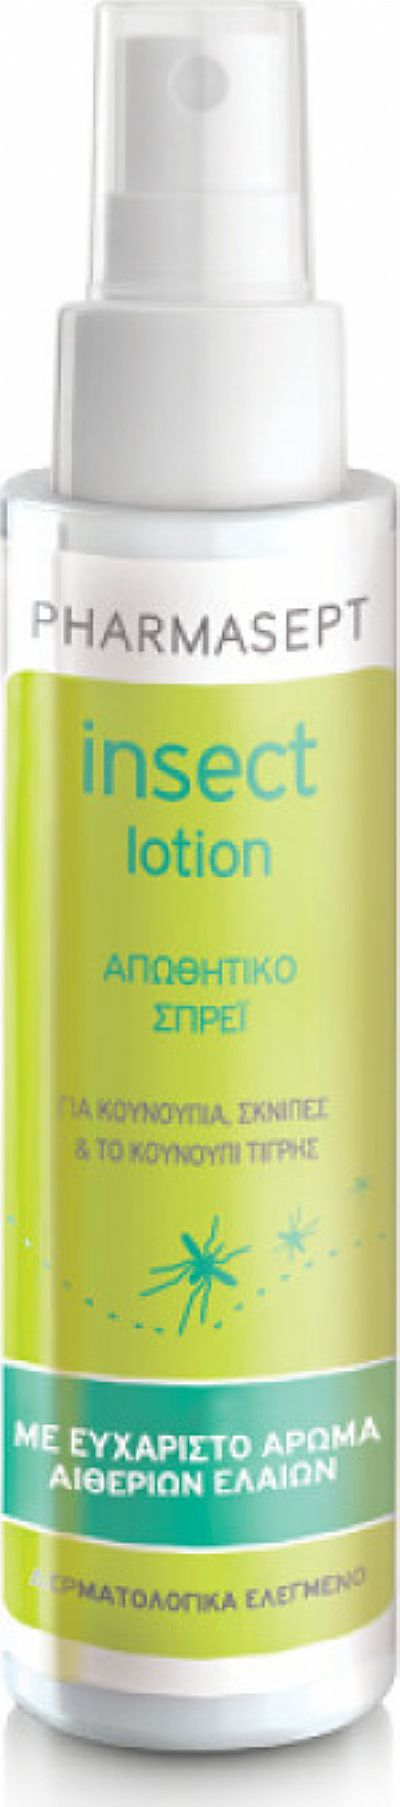 Pharmasept Insect Lotion Spray 100ml 